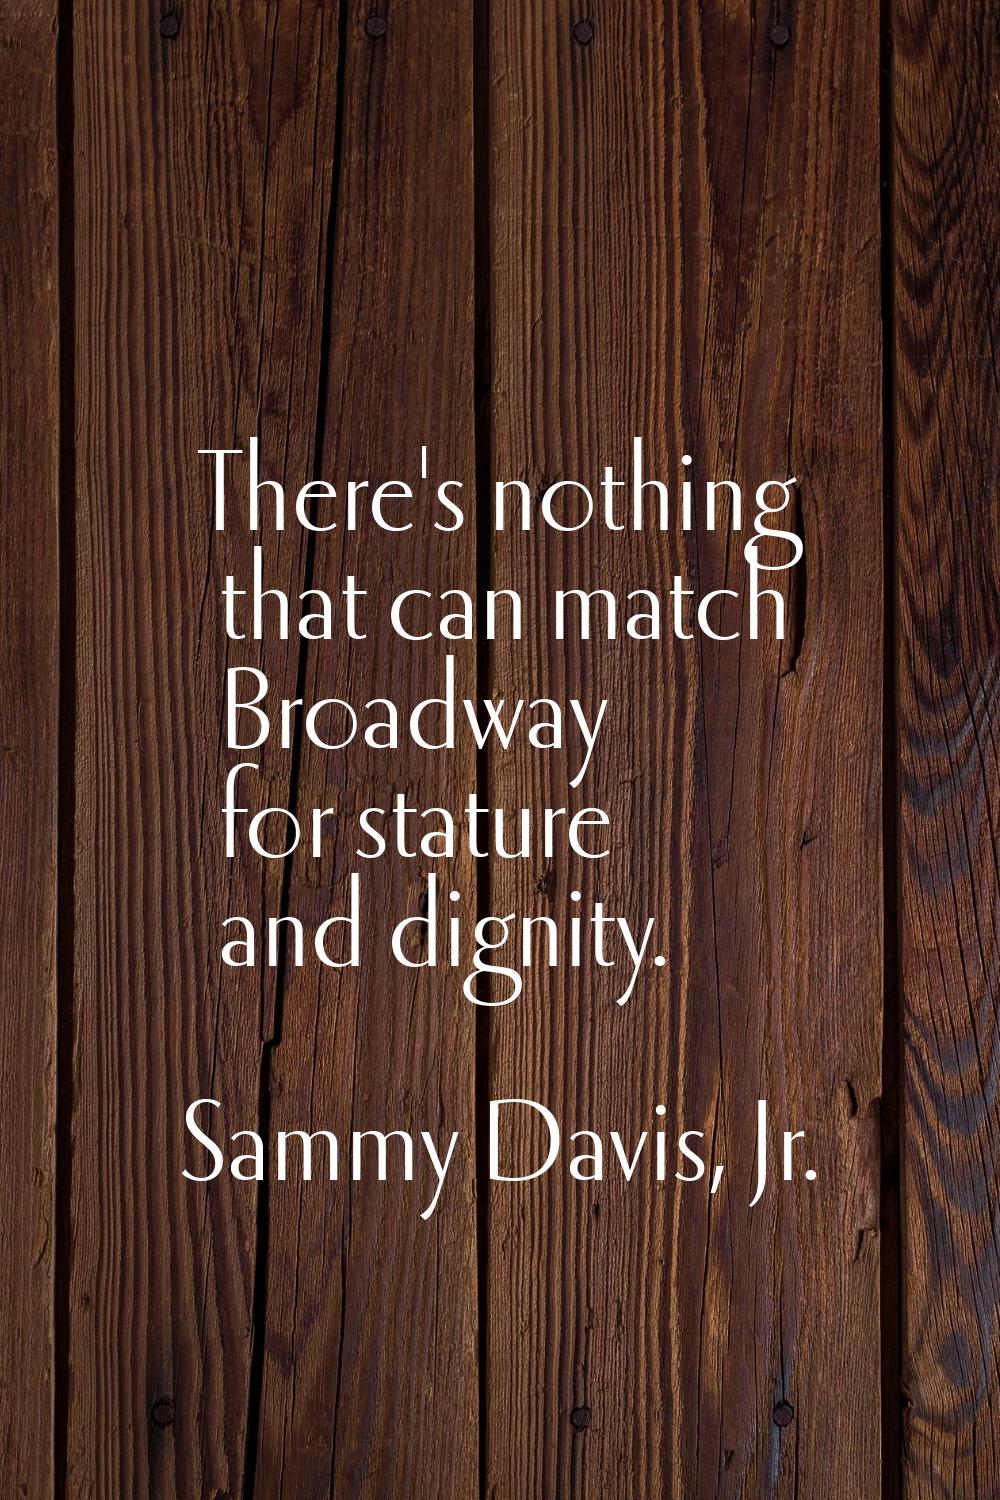 There's nothing that can match Broadway for stature and dignity.